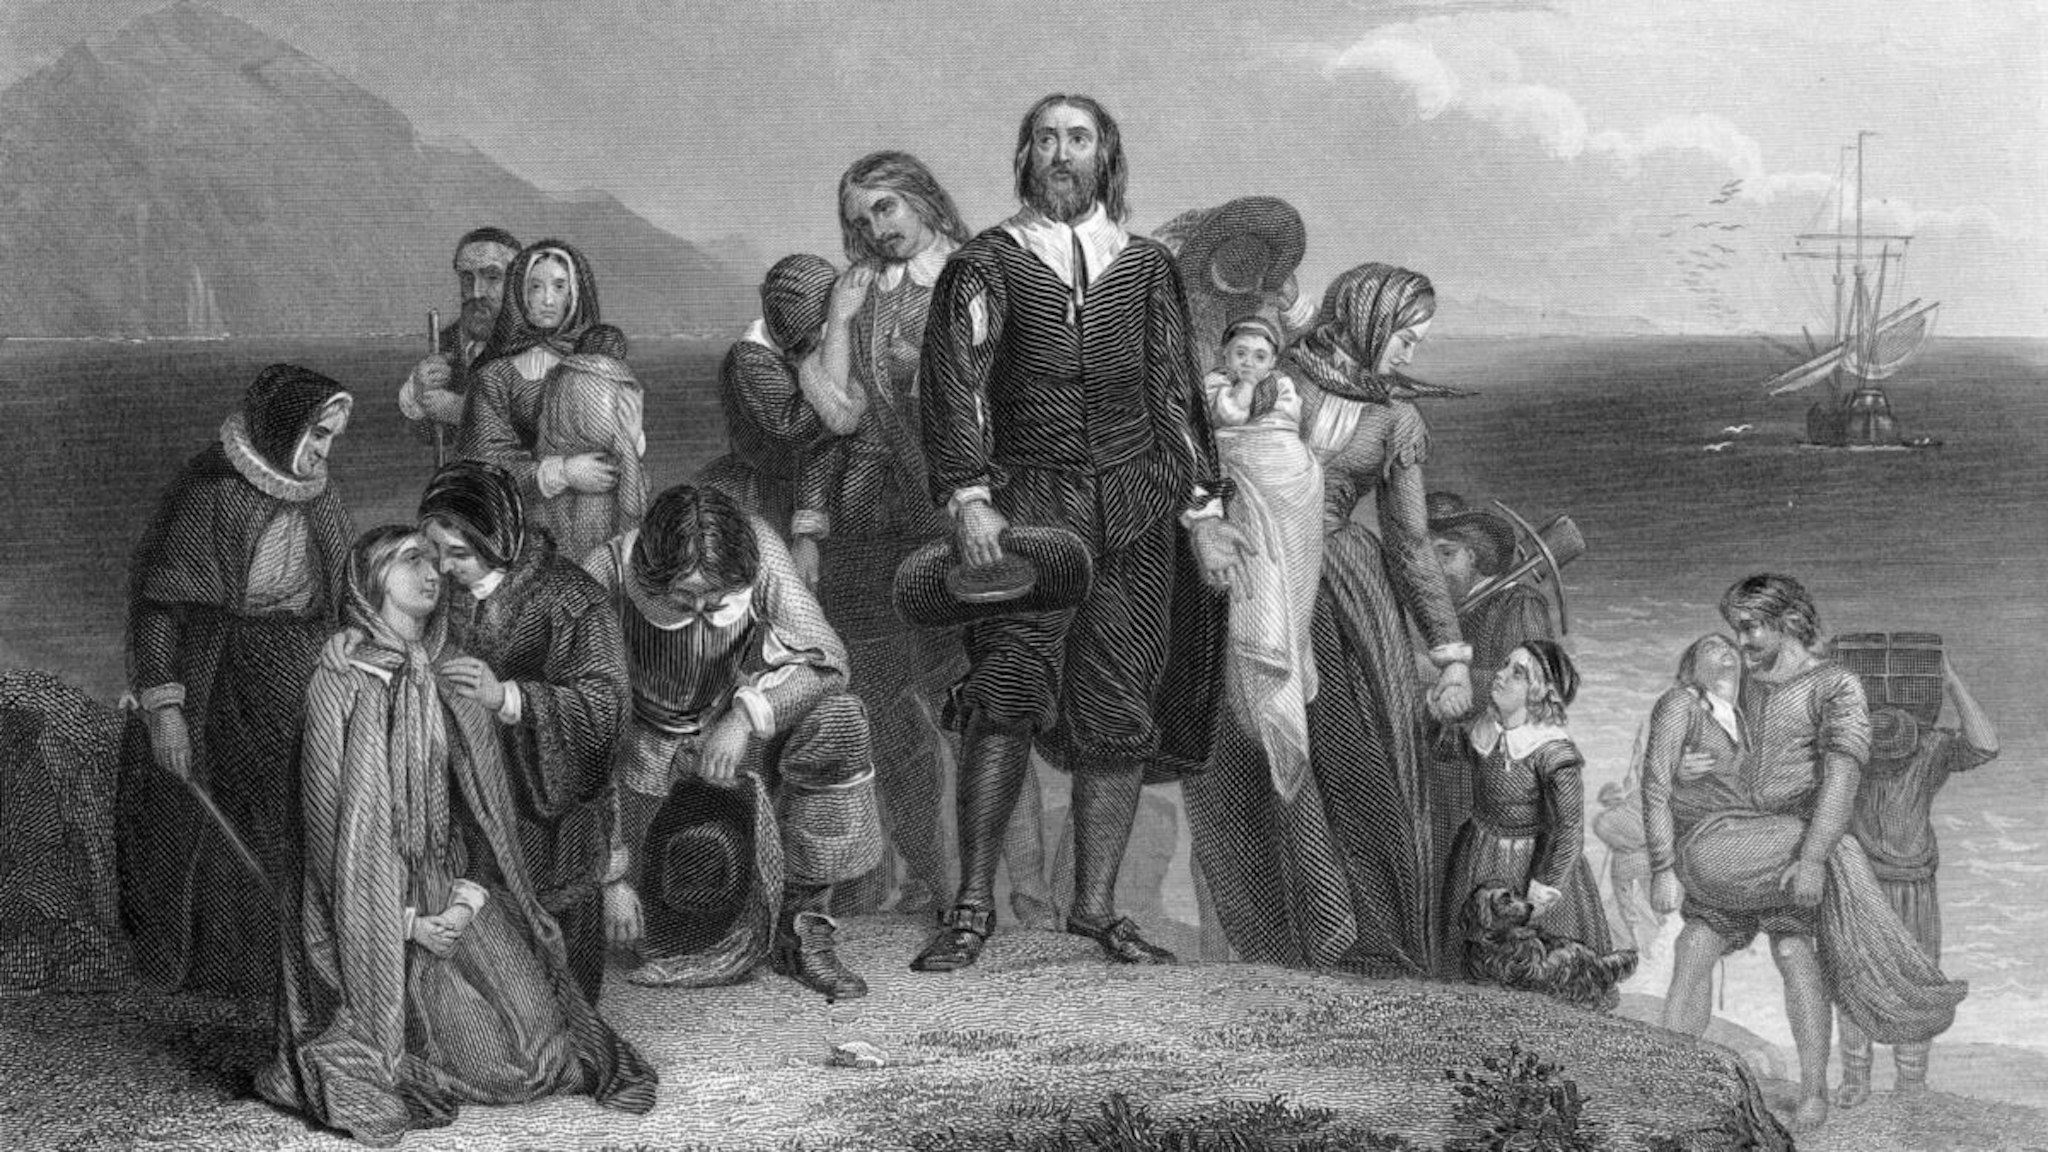 An engraving depicts the arrival of the pilgrims at Plymouth Rock, on the coast of what became Massachussetts, 1620.